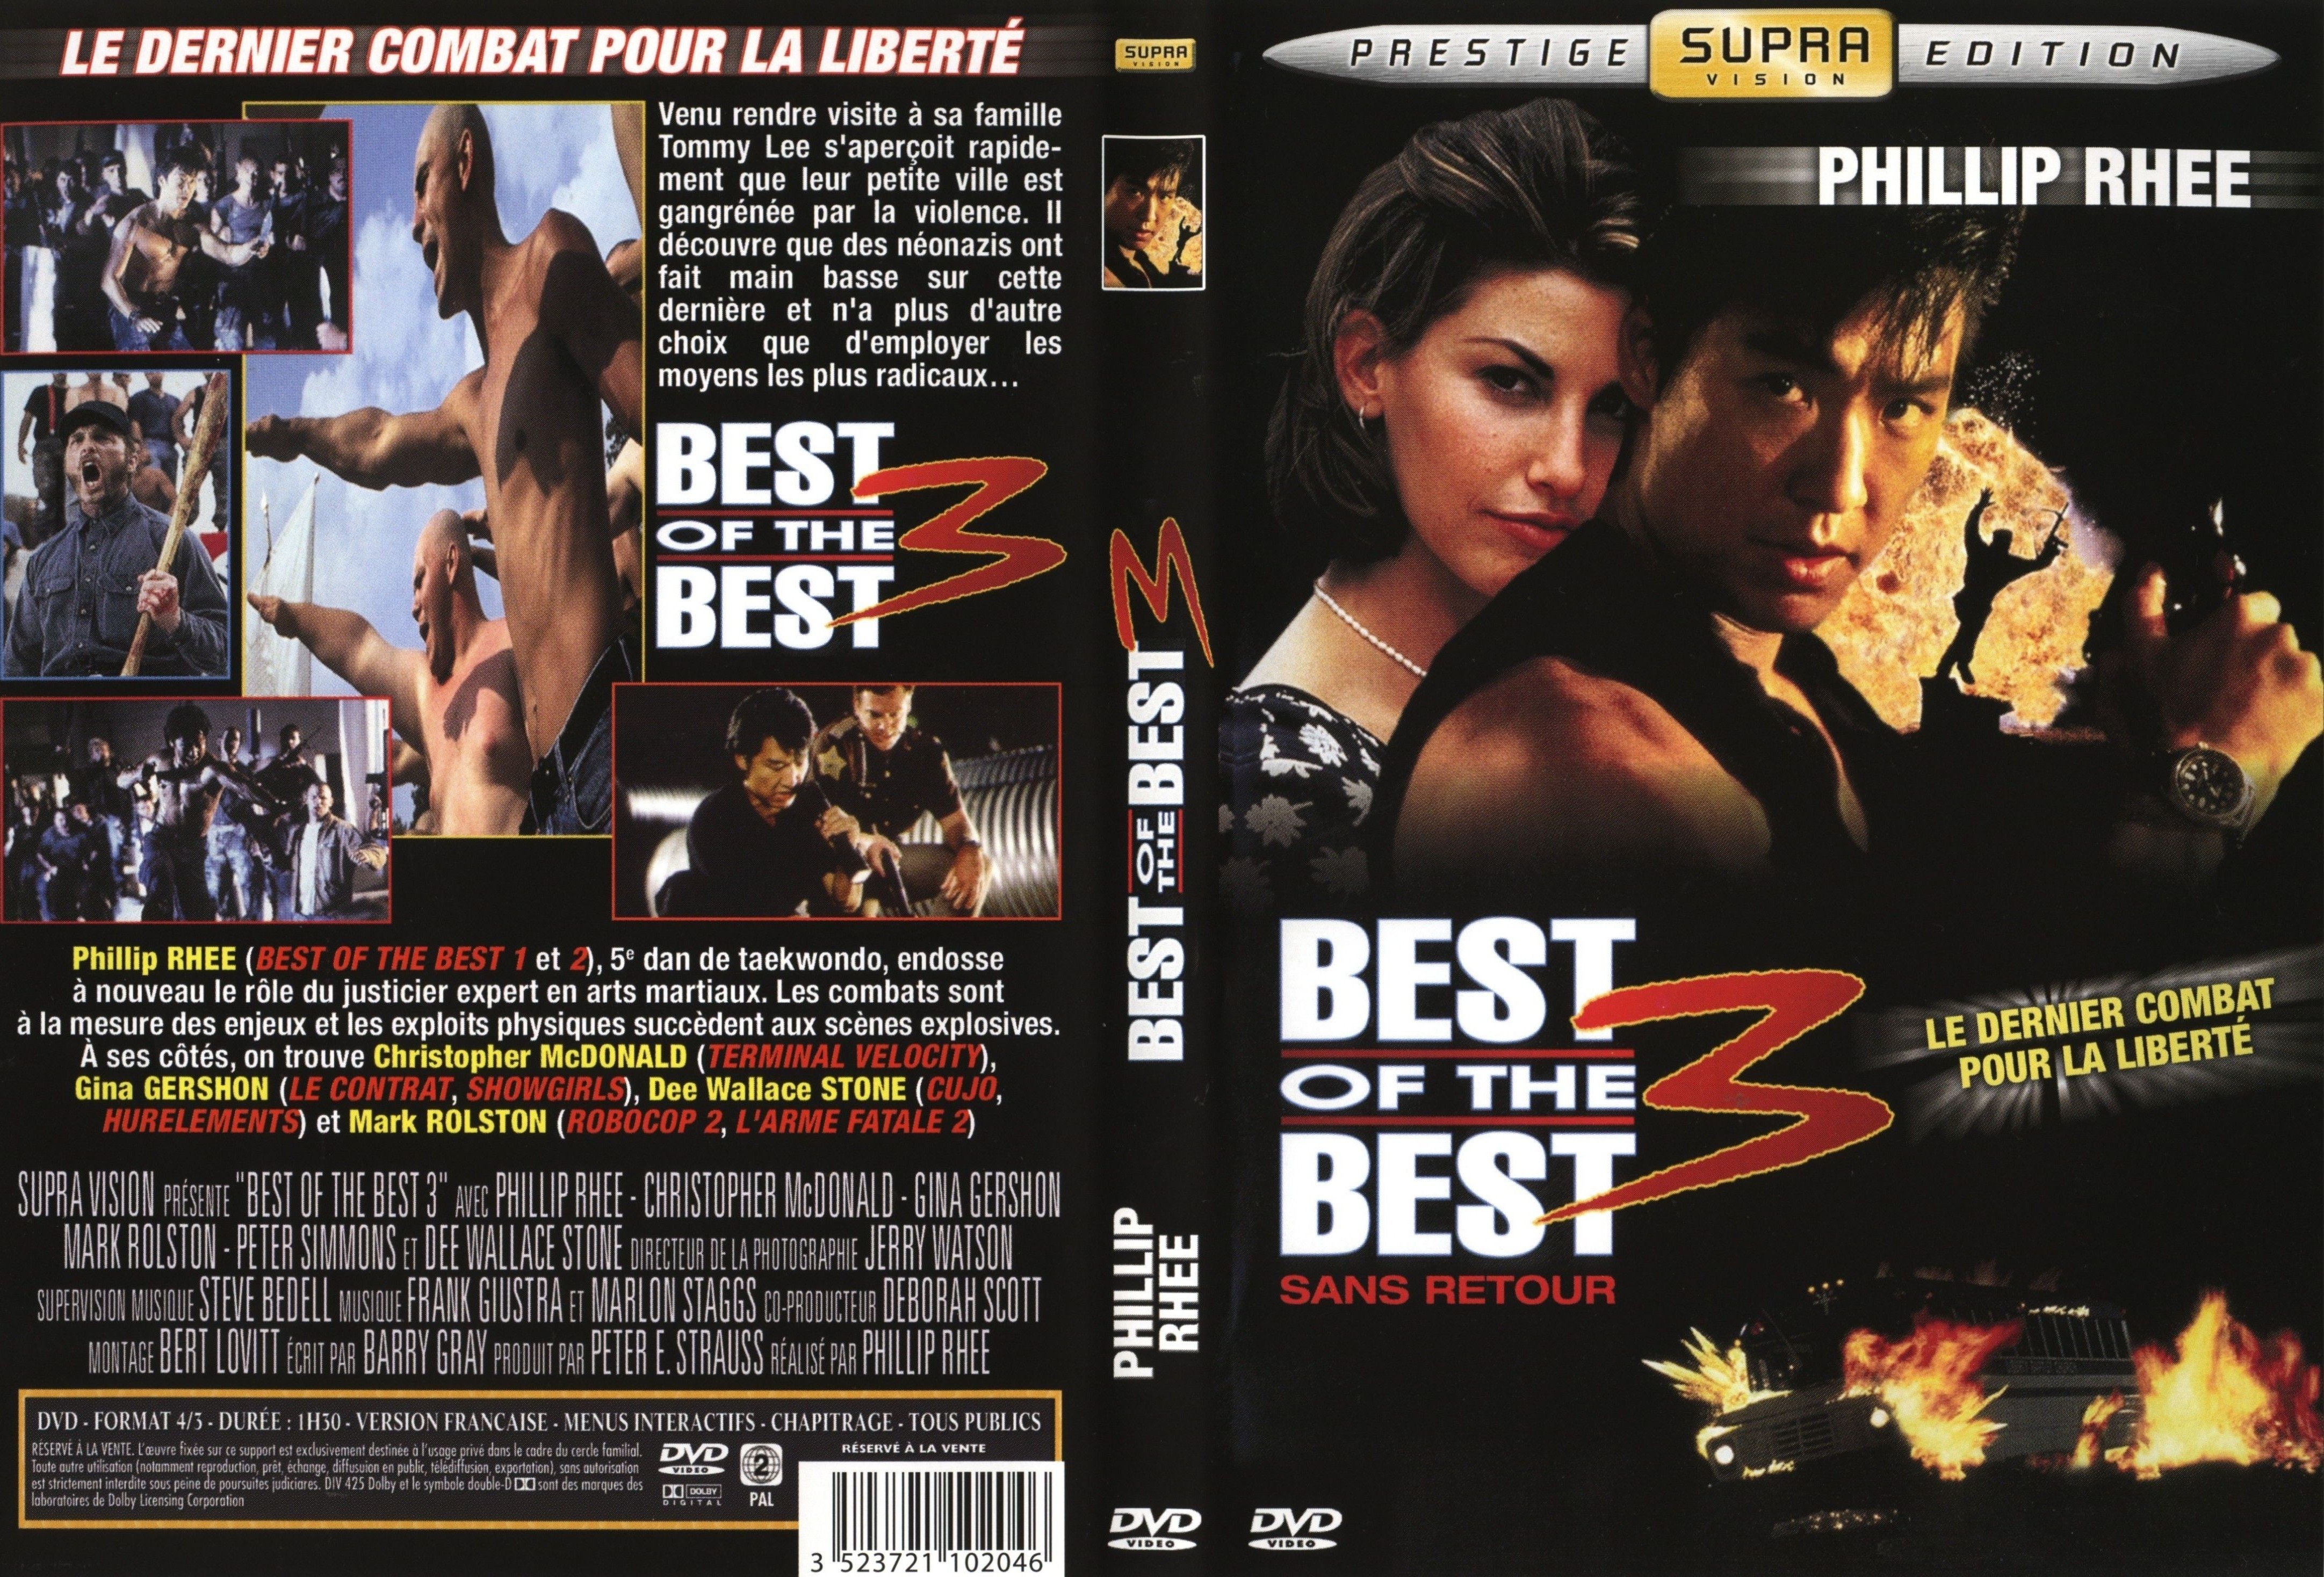 Jaquette DVD Best of the best 3 v2